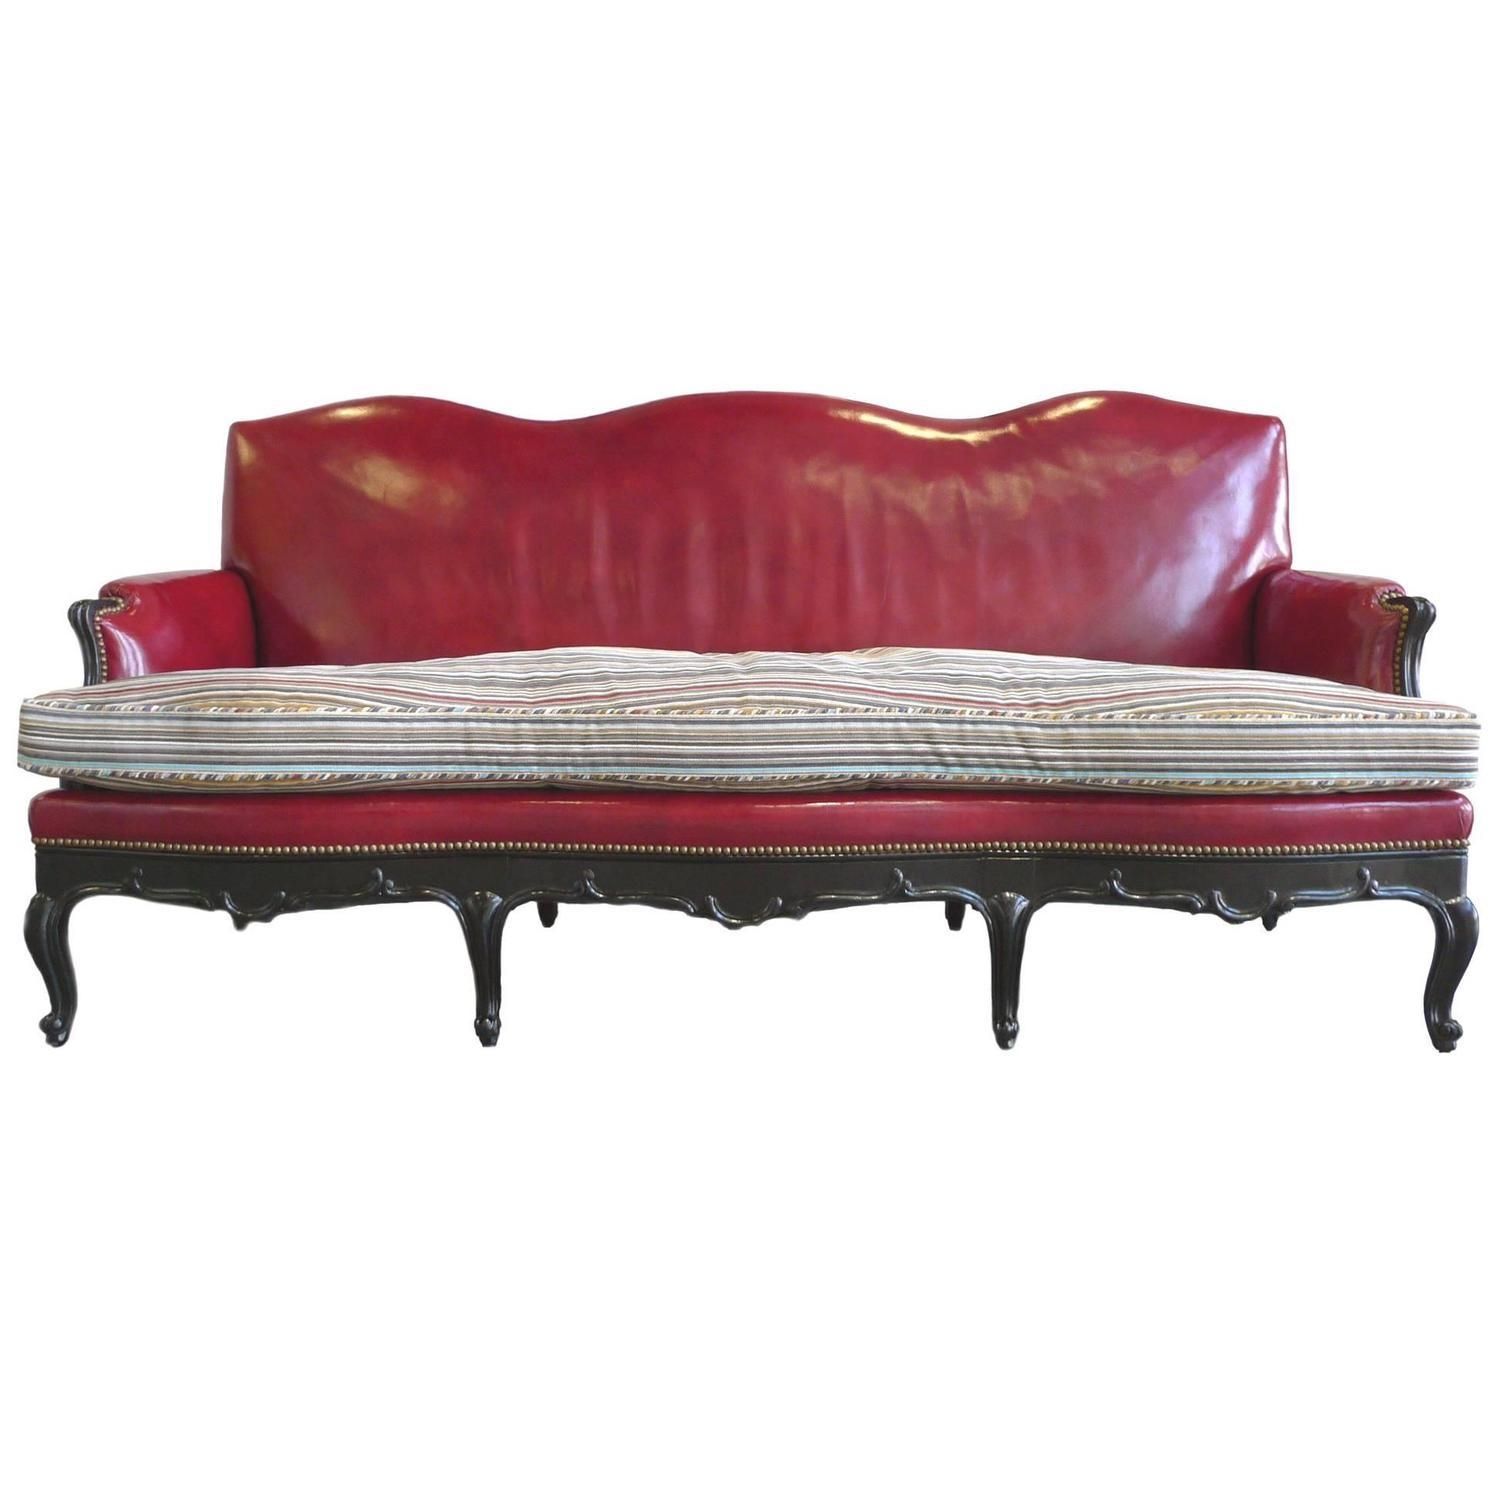 Louis Xv Style Red Leather Camelback Sofa With Paul Smith Fabric Regarding Camelback Leather Sofas (View 15 of 20)